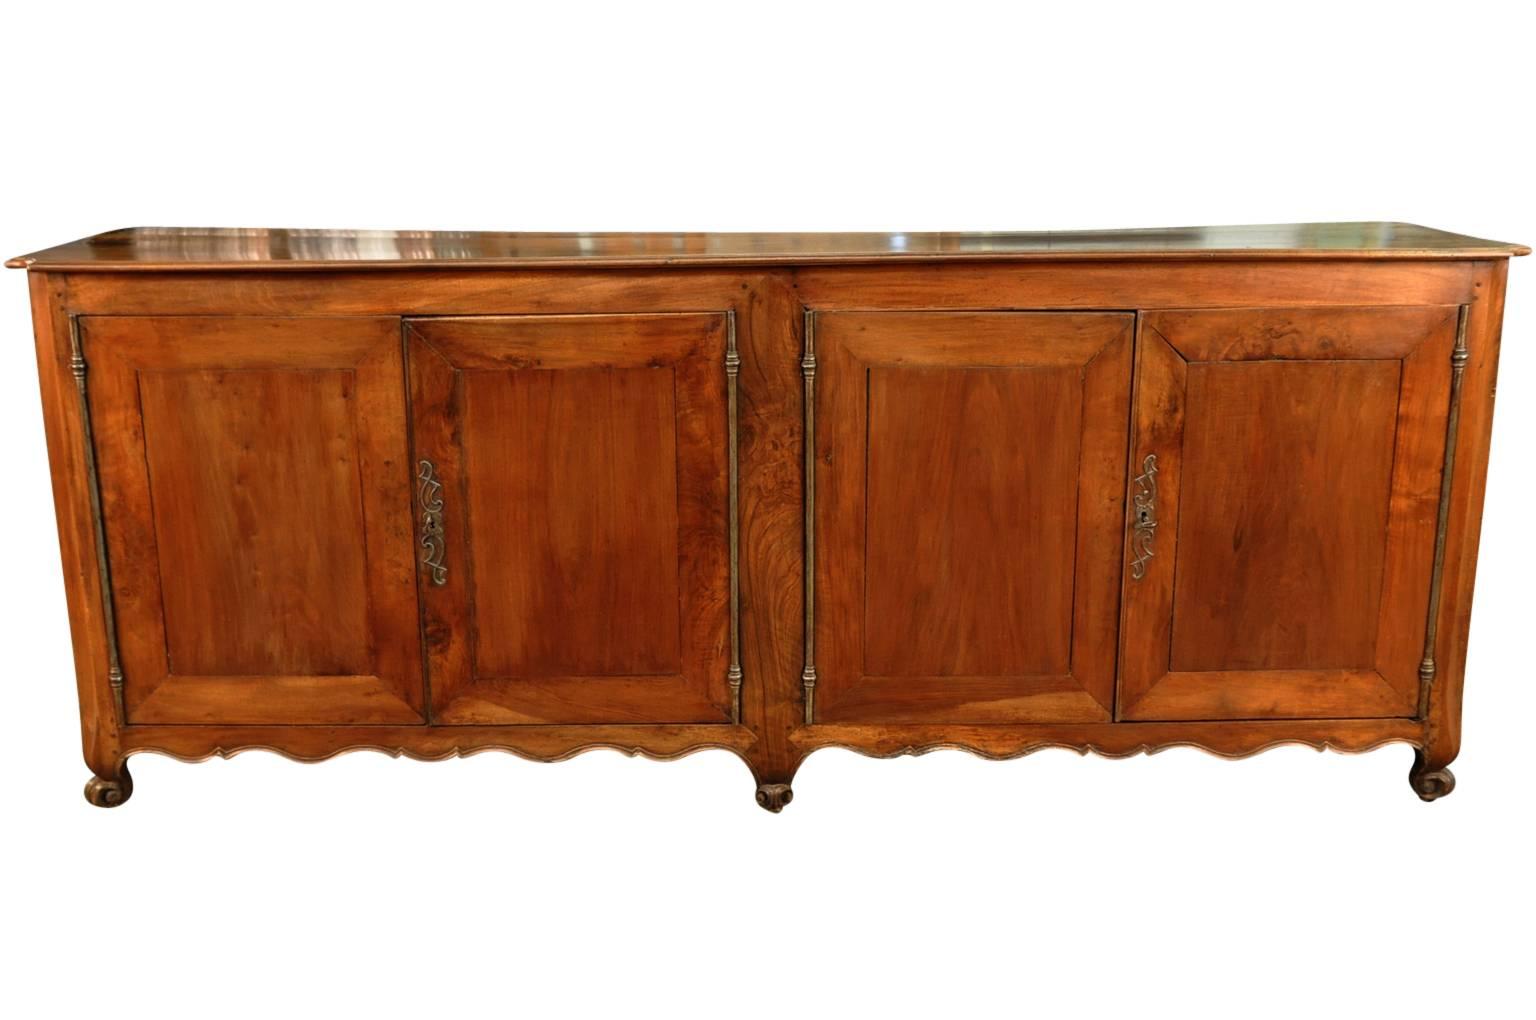 An exceptional and grand scale 18th century credenza from Northern Italy. Masterly constructed from stunning walnut with very elegant lines.